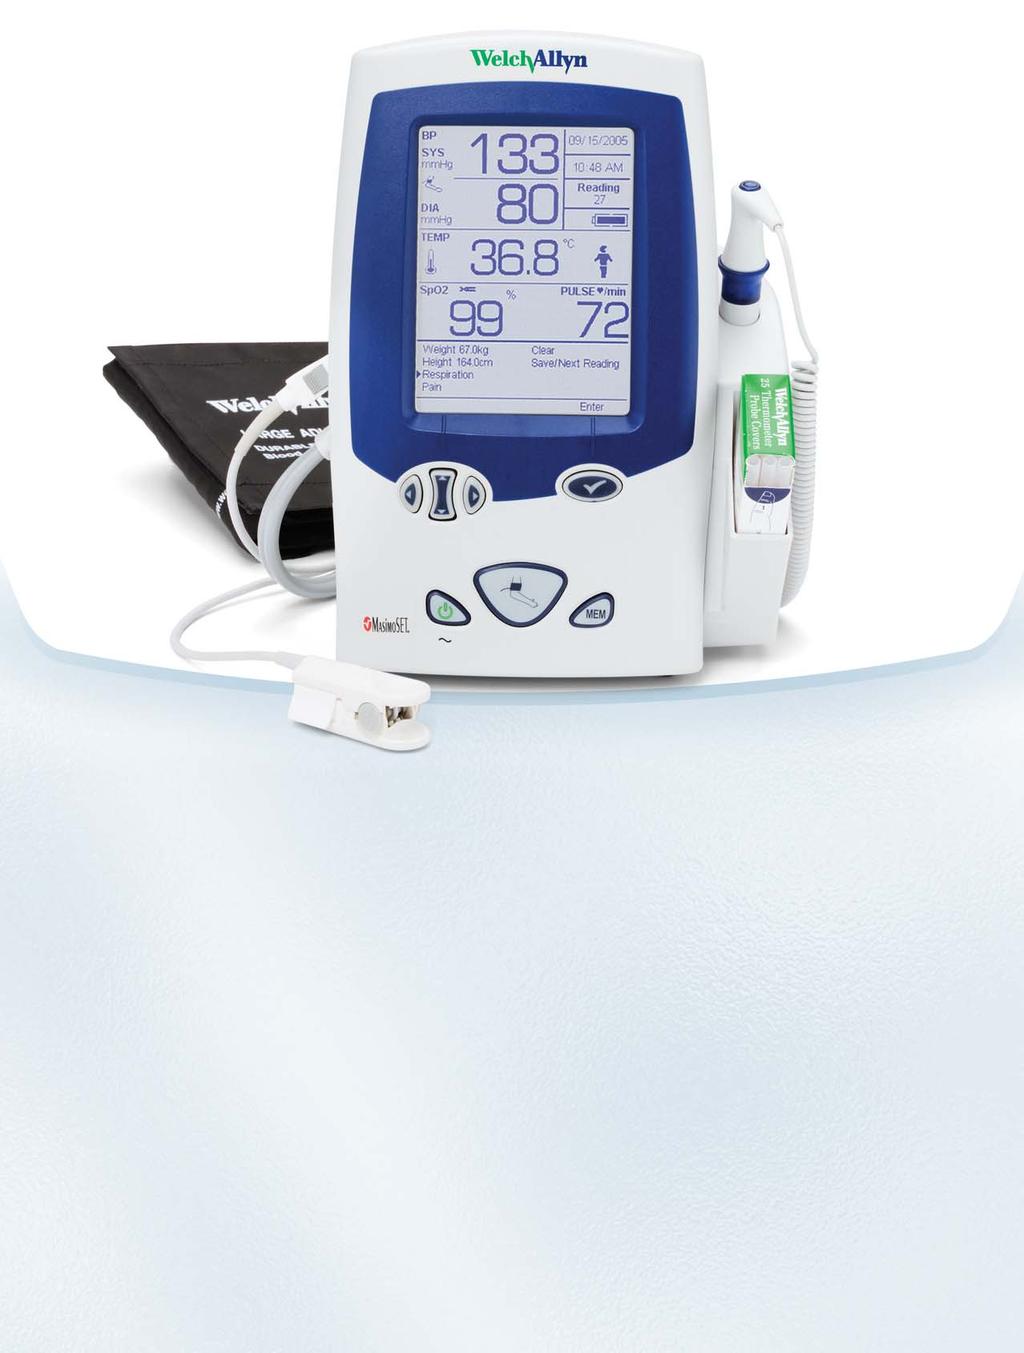 Welch Allyn Spot Vital Signs LXi Specifications Features > SureBP with pulse rate and MAP > SureTemp Plus or Braun ThermoScan PRO 4000 thermometry > Masimo or Nellcor pulse oximetry > Manual weight,